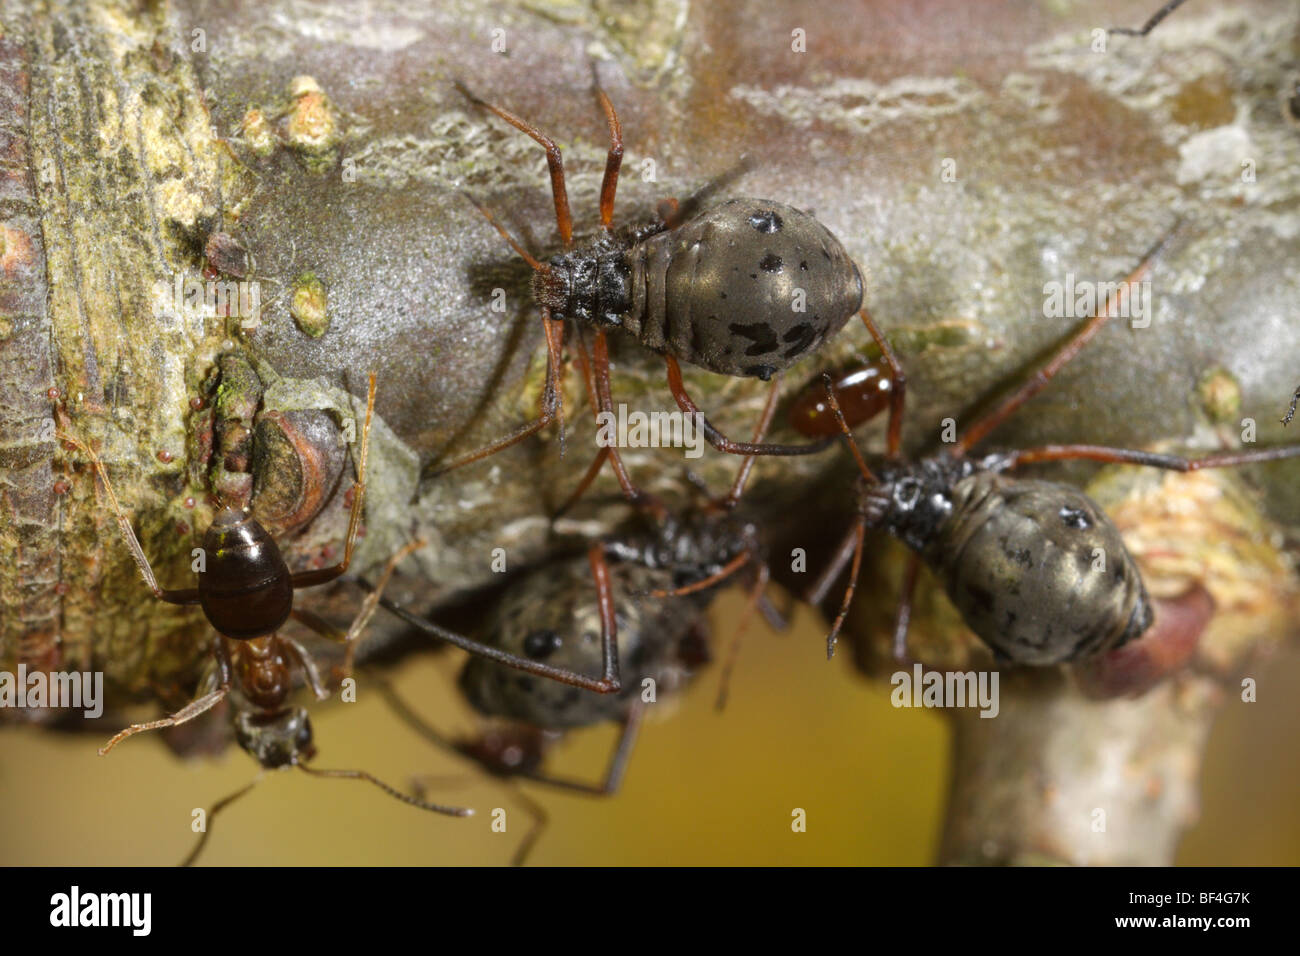 Lachnus roboris, an aphid that feeds on oaks, is being tended by a Black Garden Ant (Lasius niger) Stock Photo